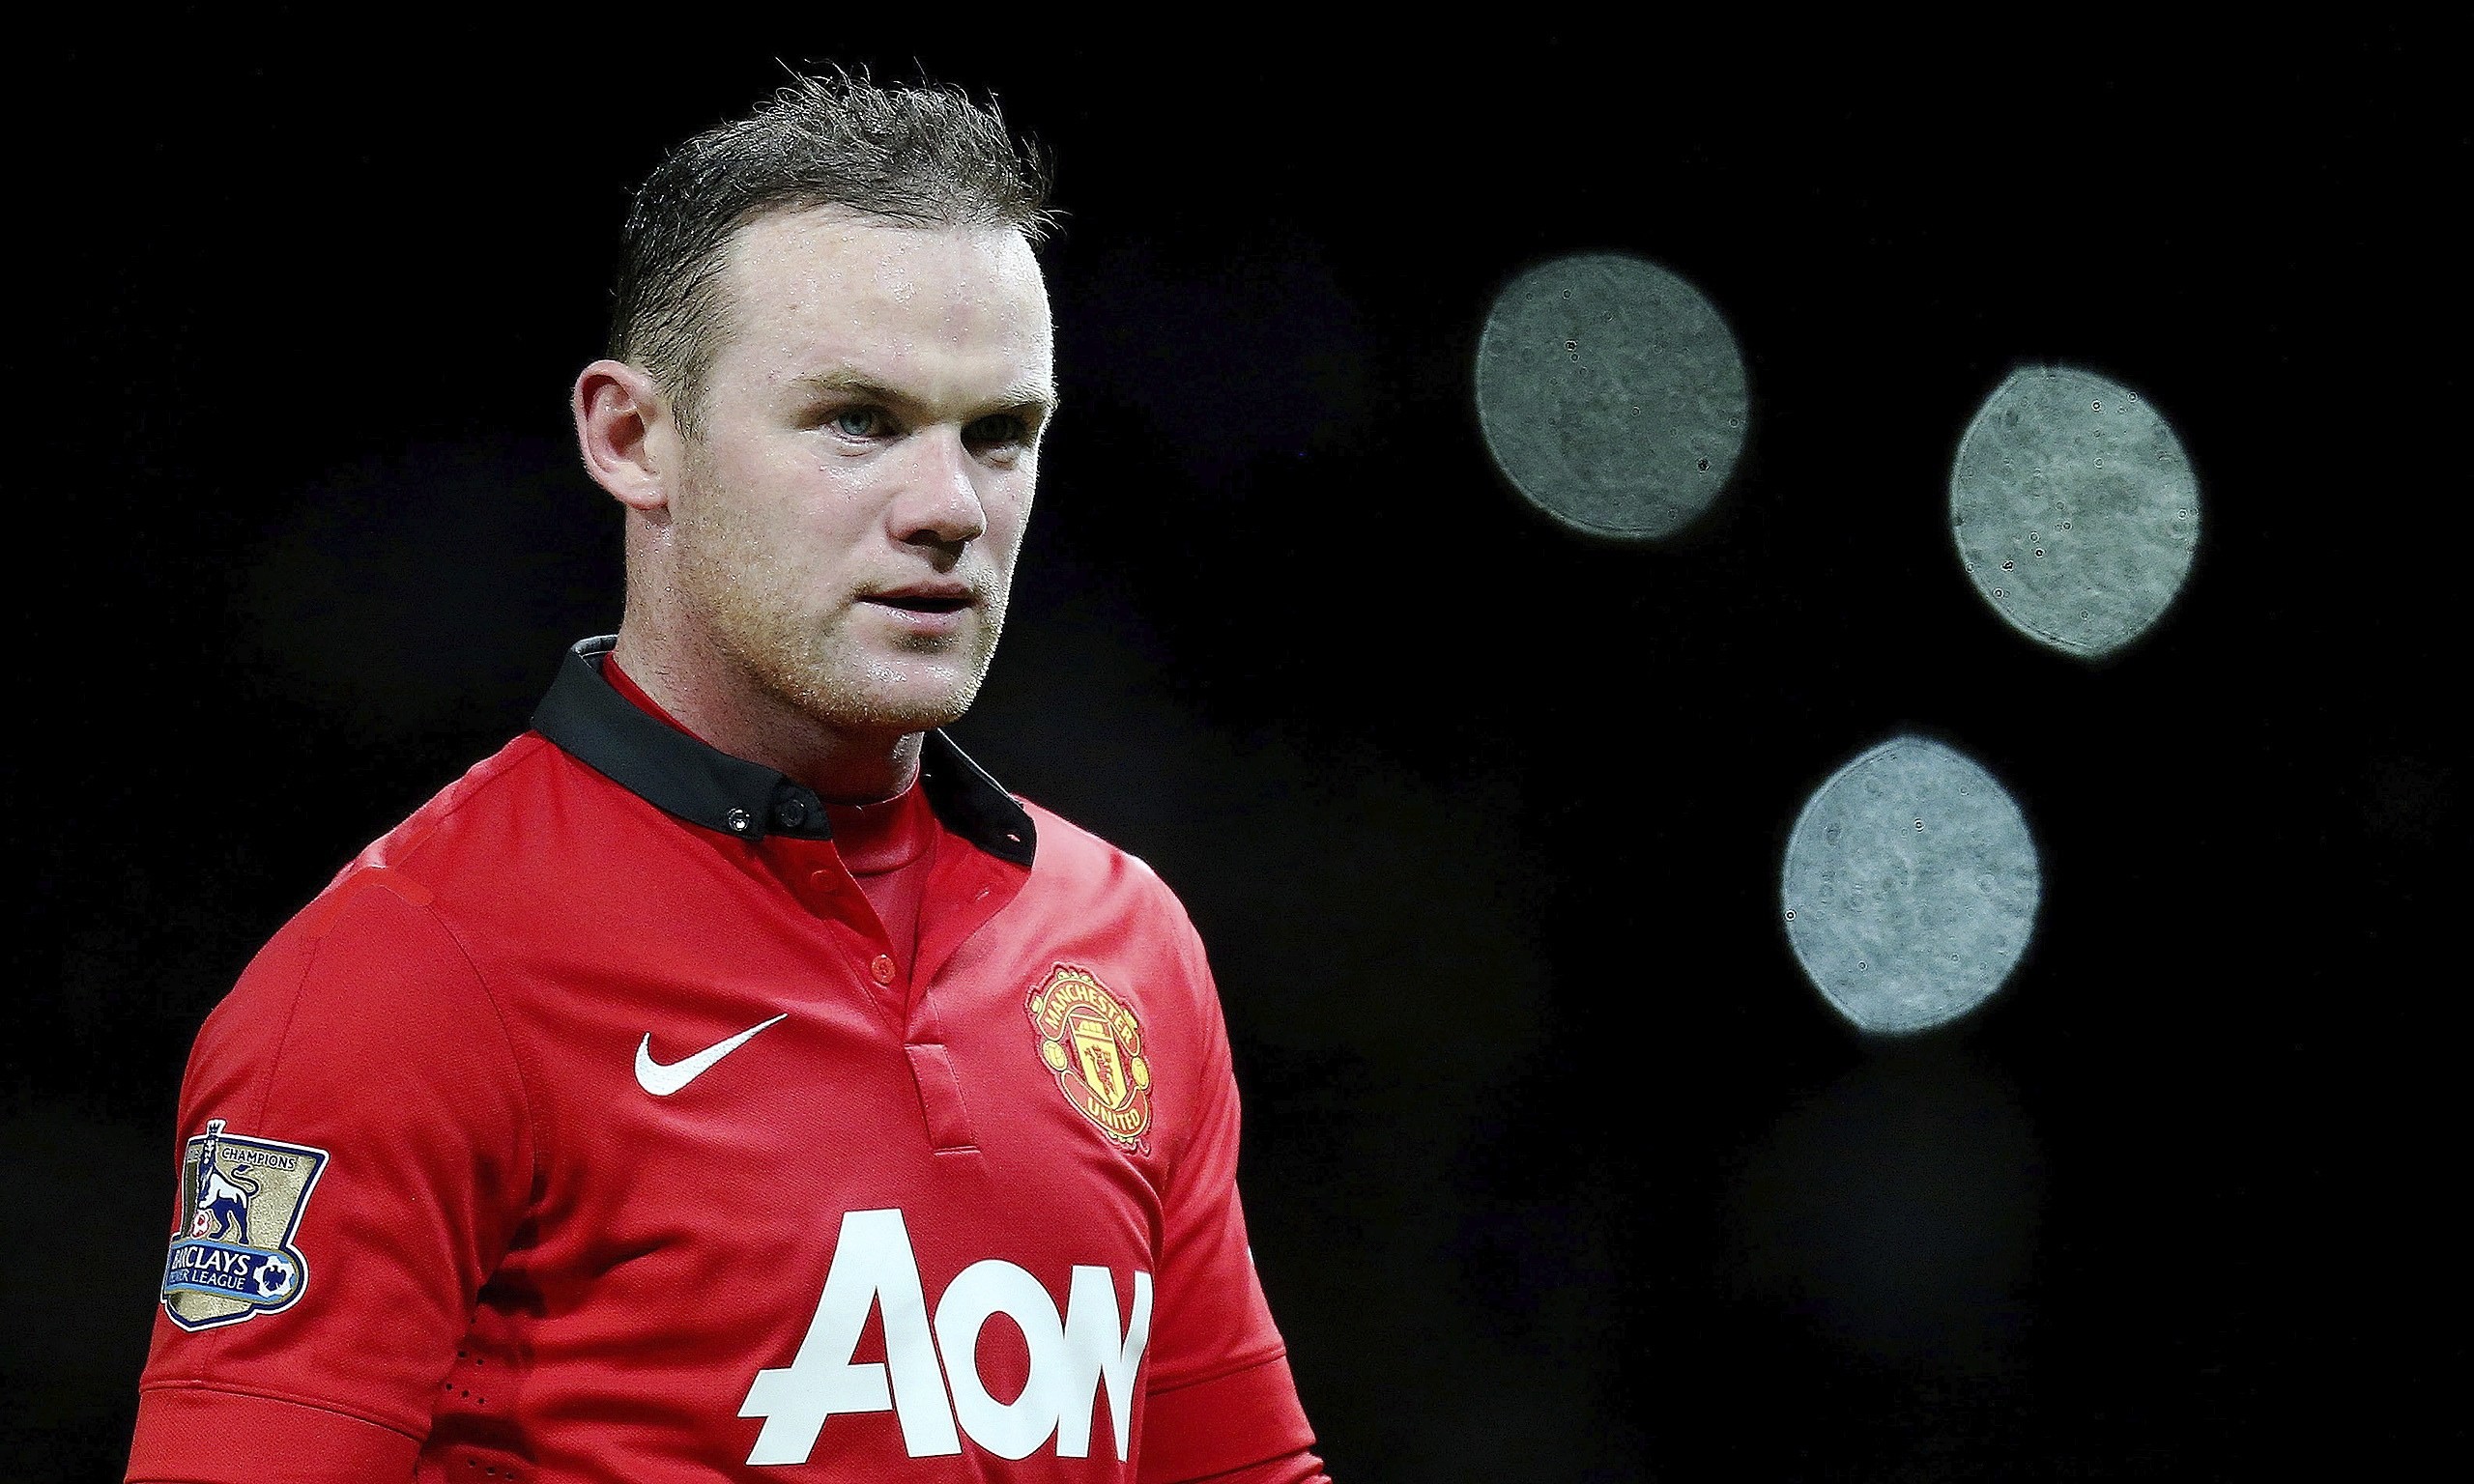 2560x1536 Wayne Rooney HD Images : Get Free top quality Wayne Rooney HD Images for  your desktop PC background, ios or android mobile phones at WOWHDBackgroun…